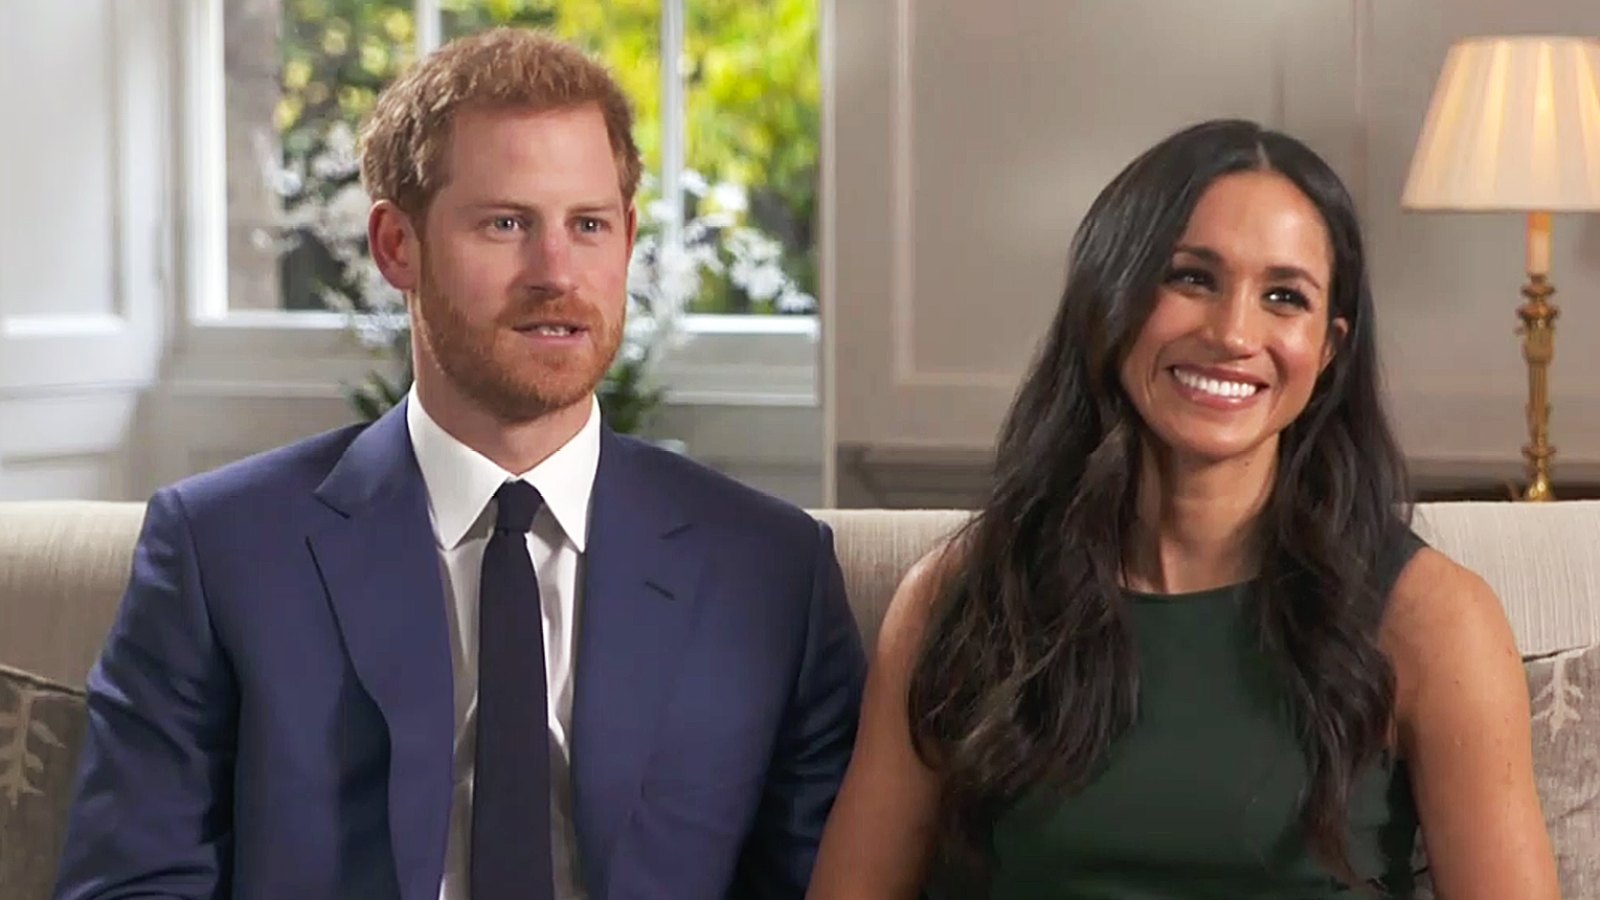 Prince Harry Meghan Markle engagement interview